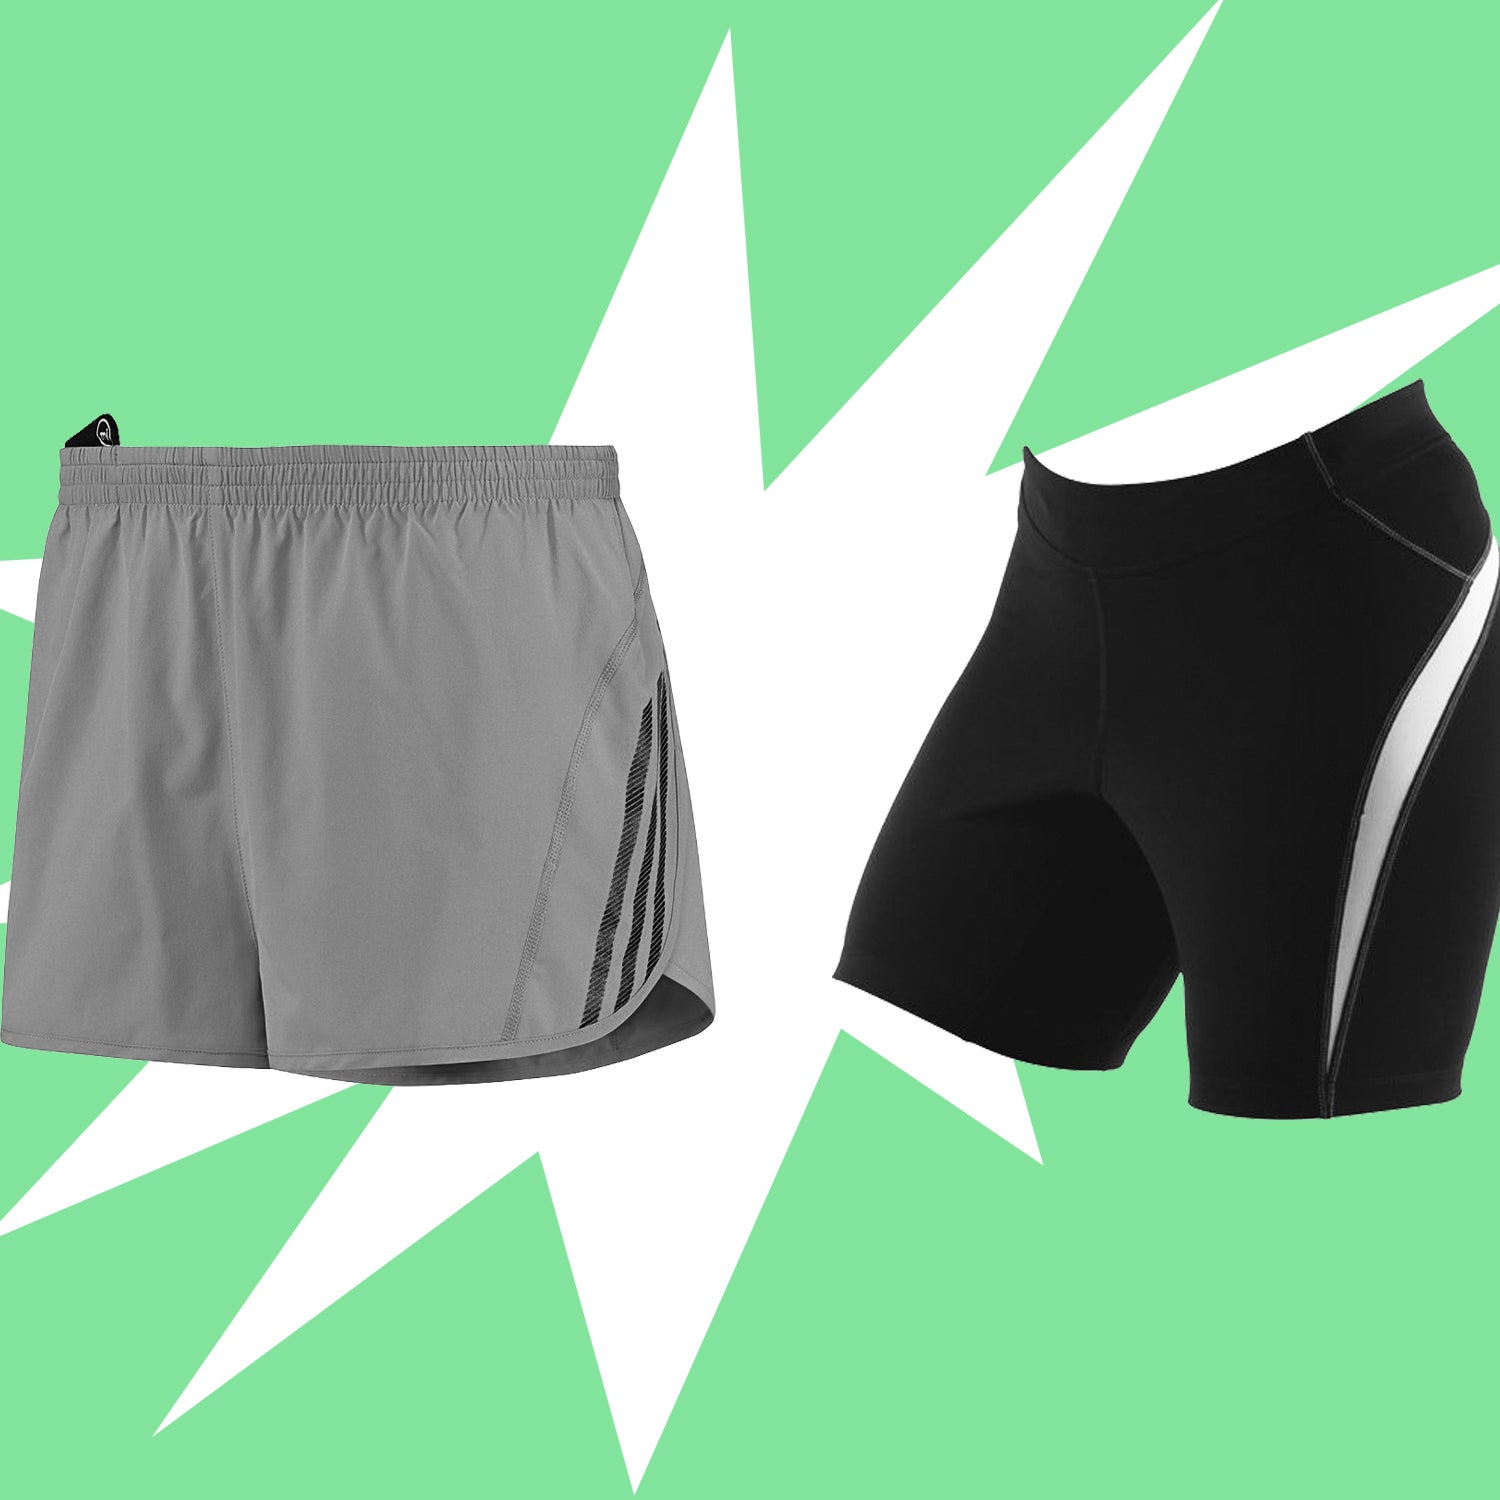 The Truth About Shorts and Tights